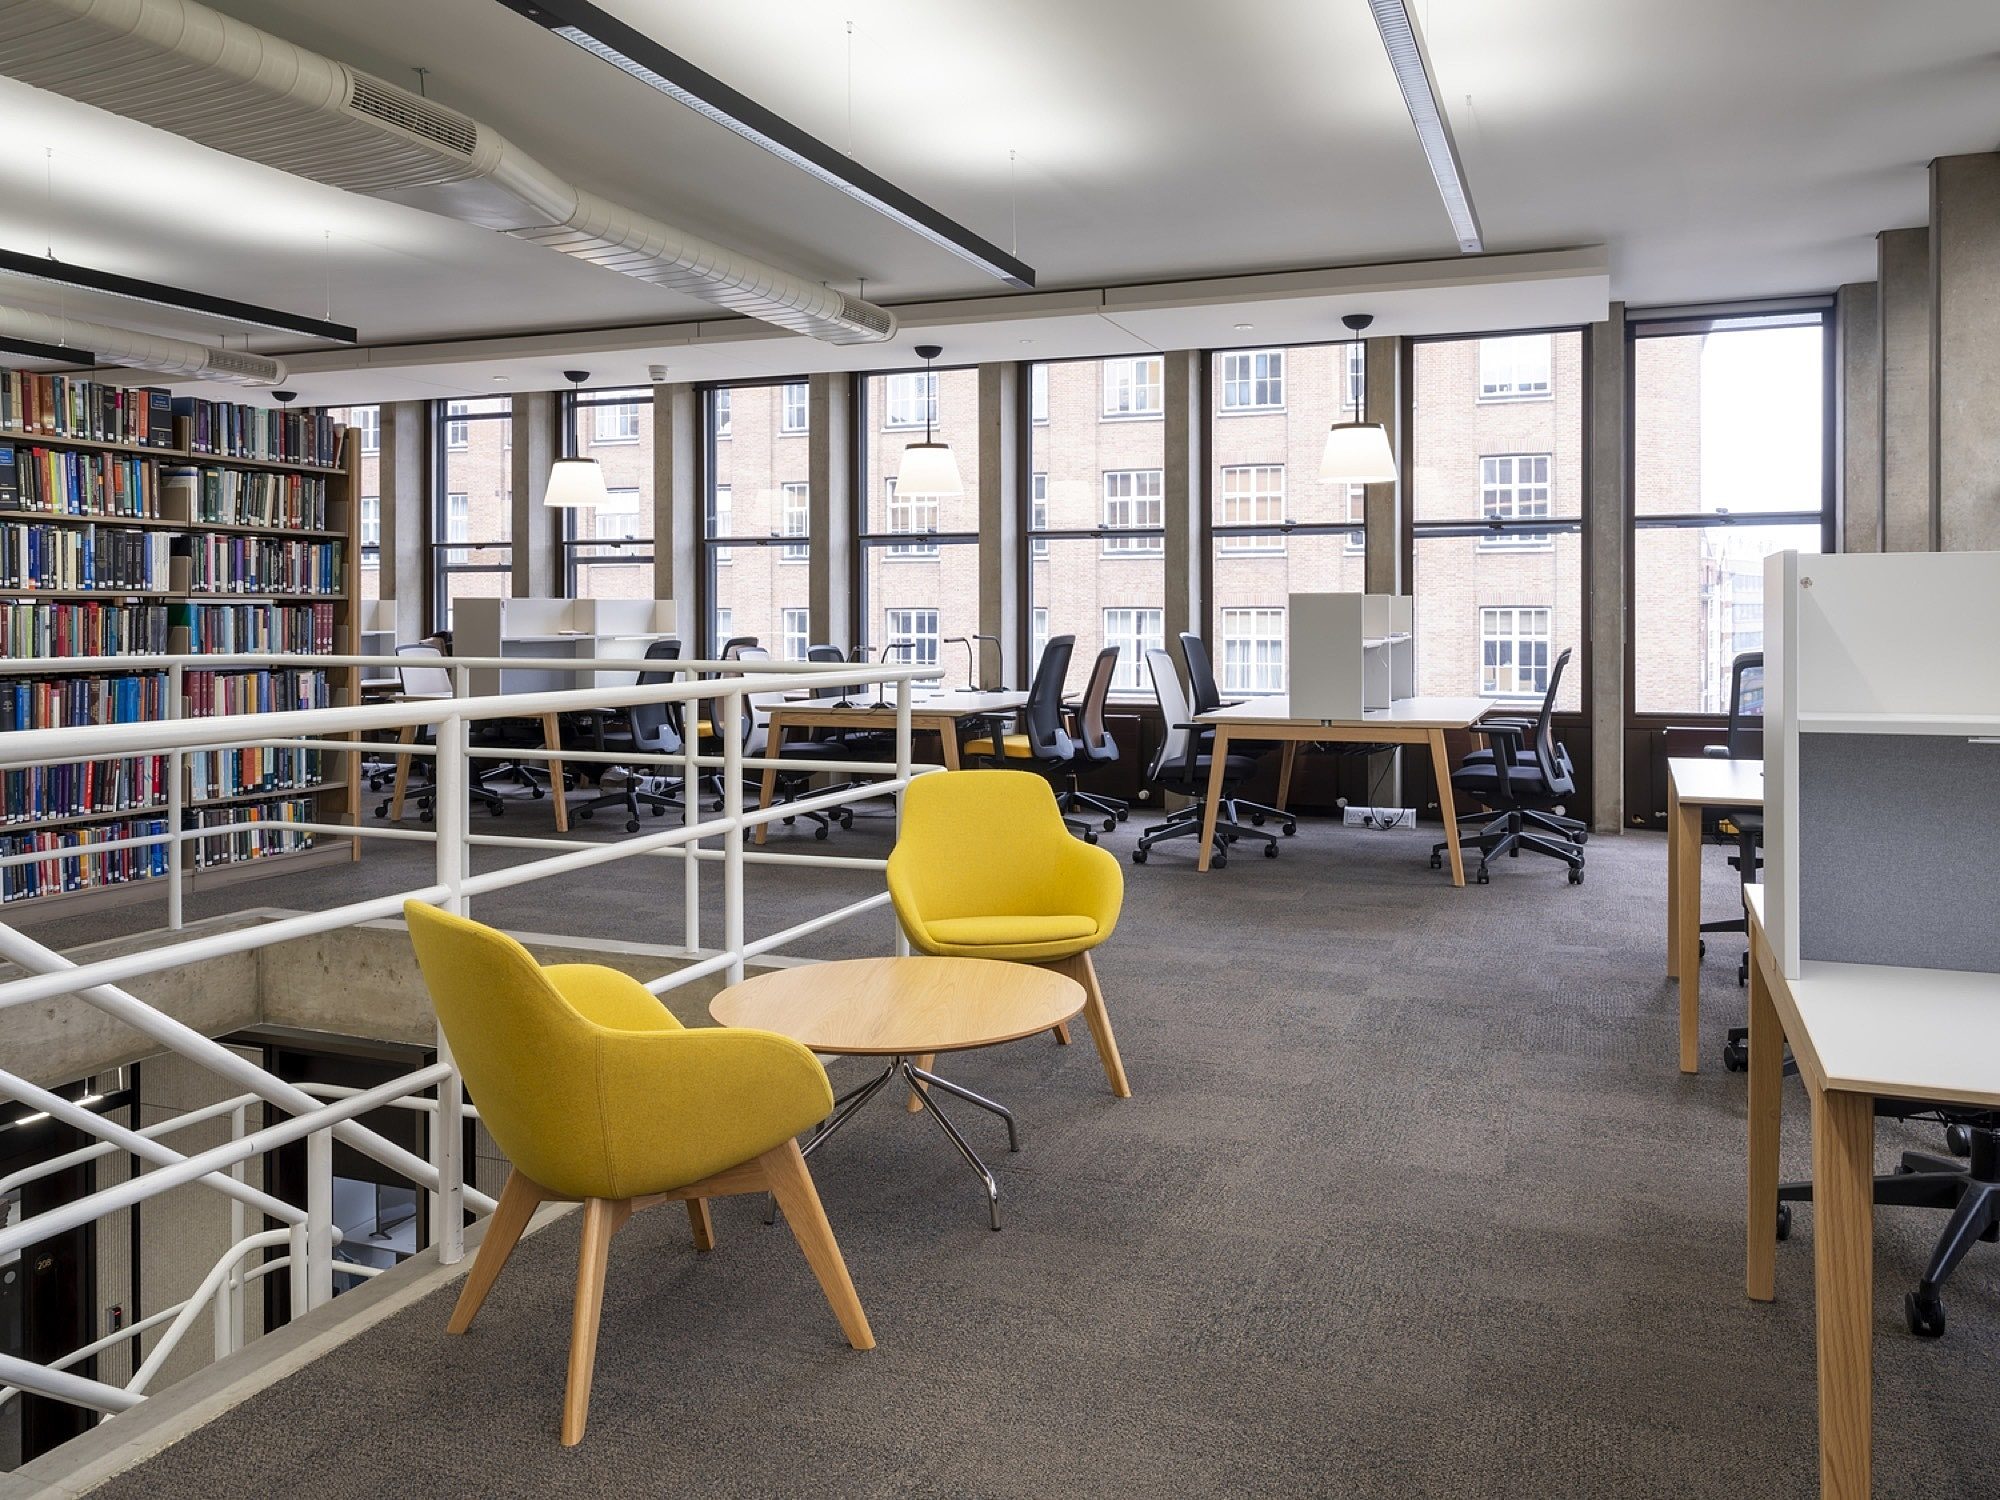 University of London library fit out